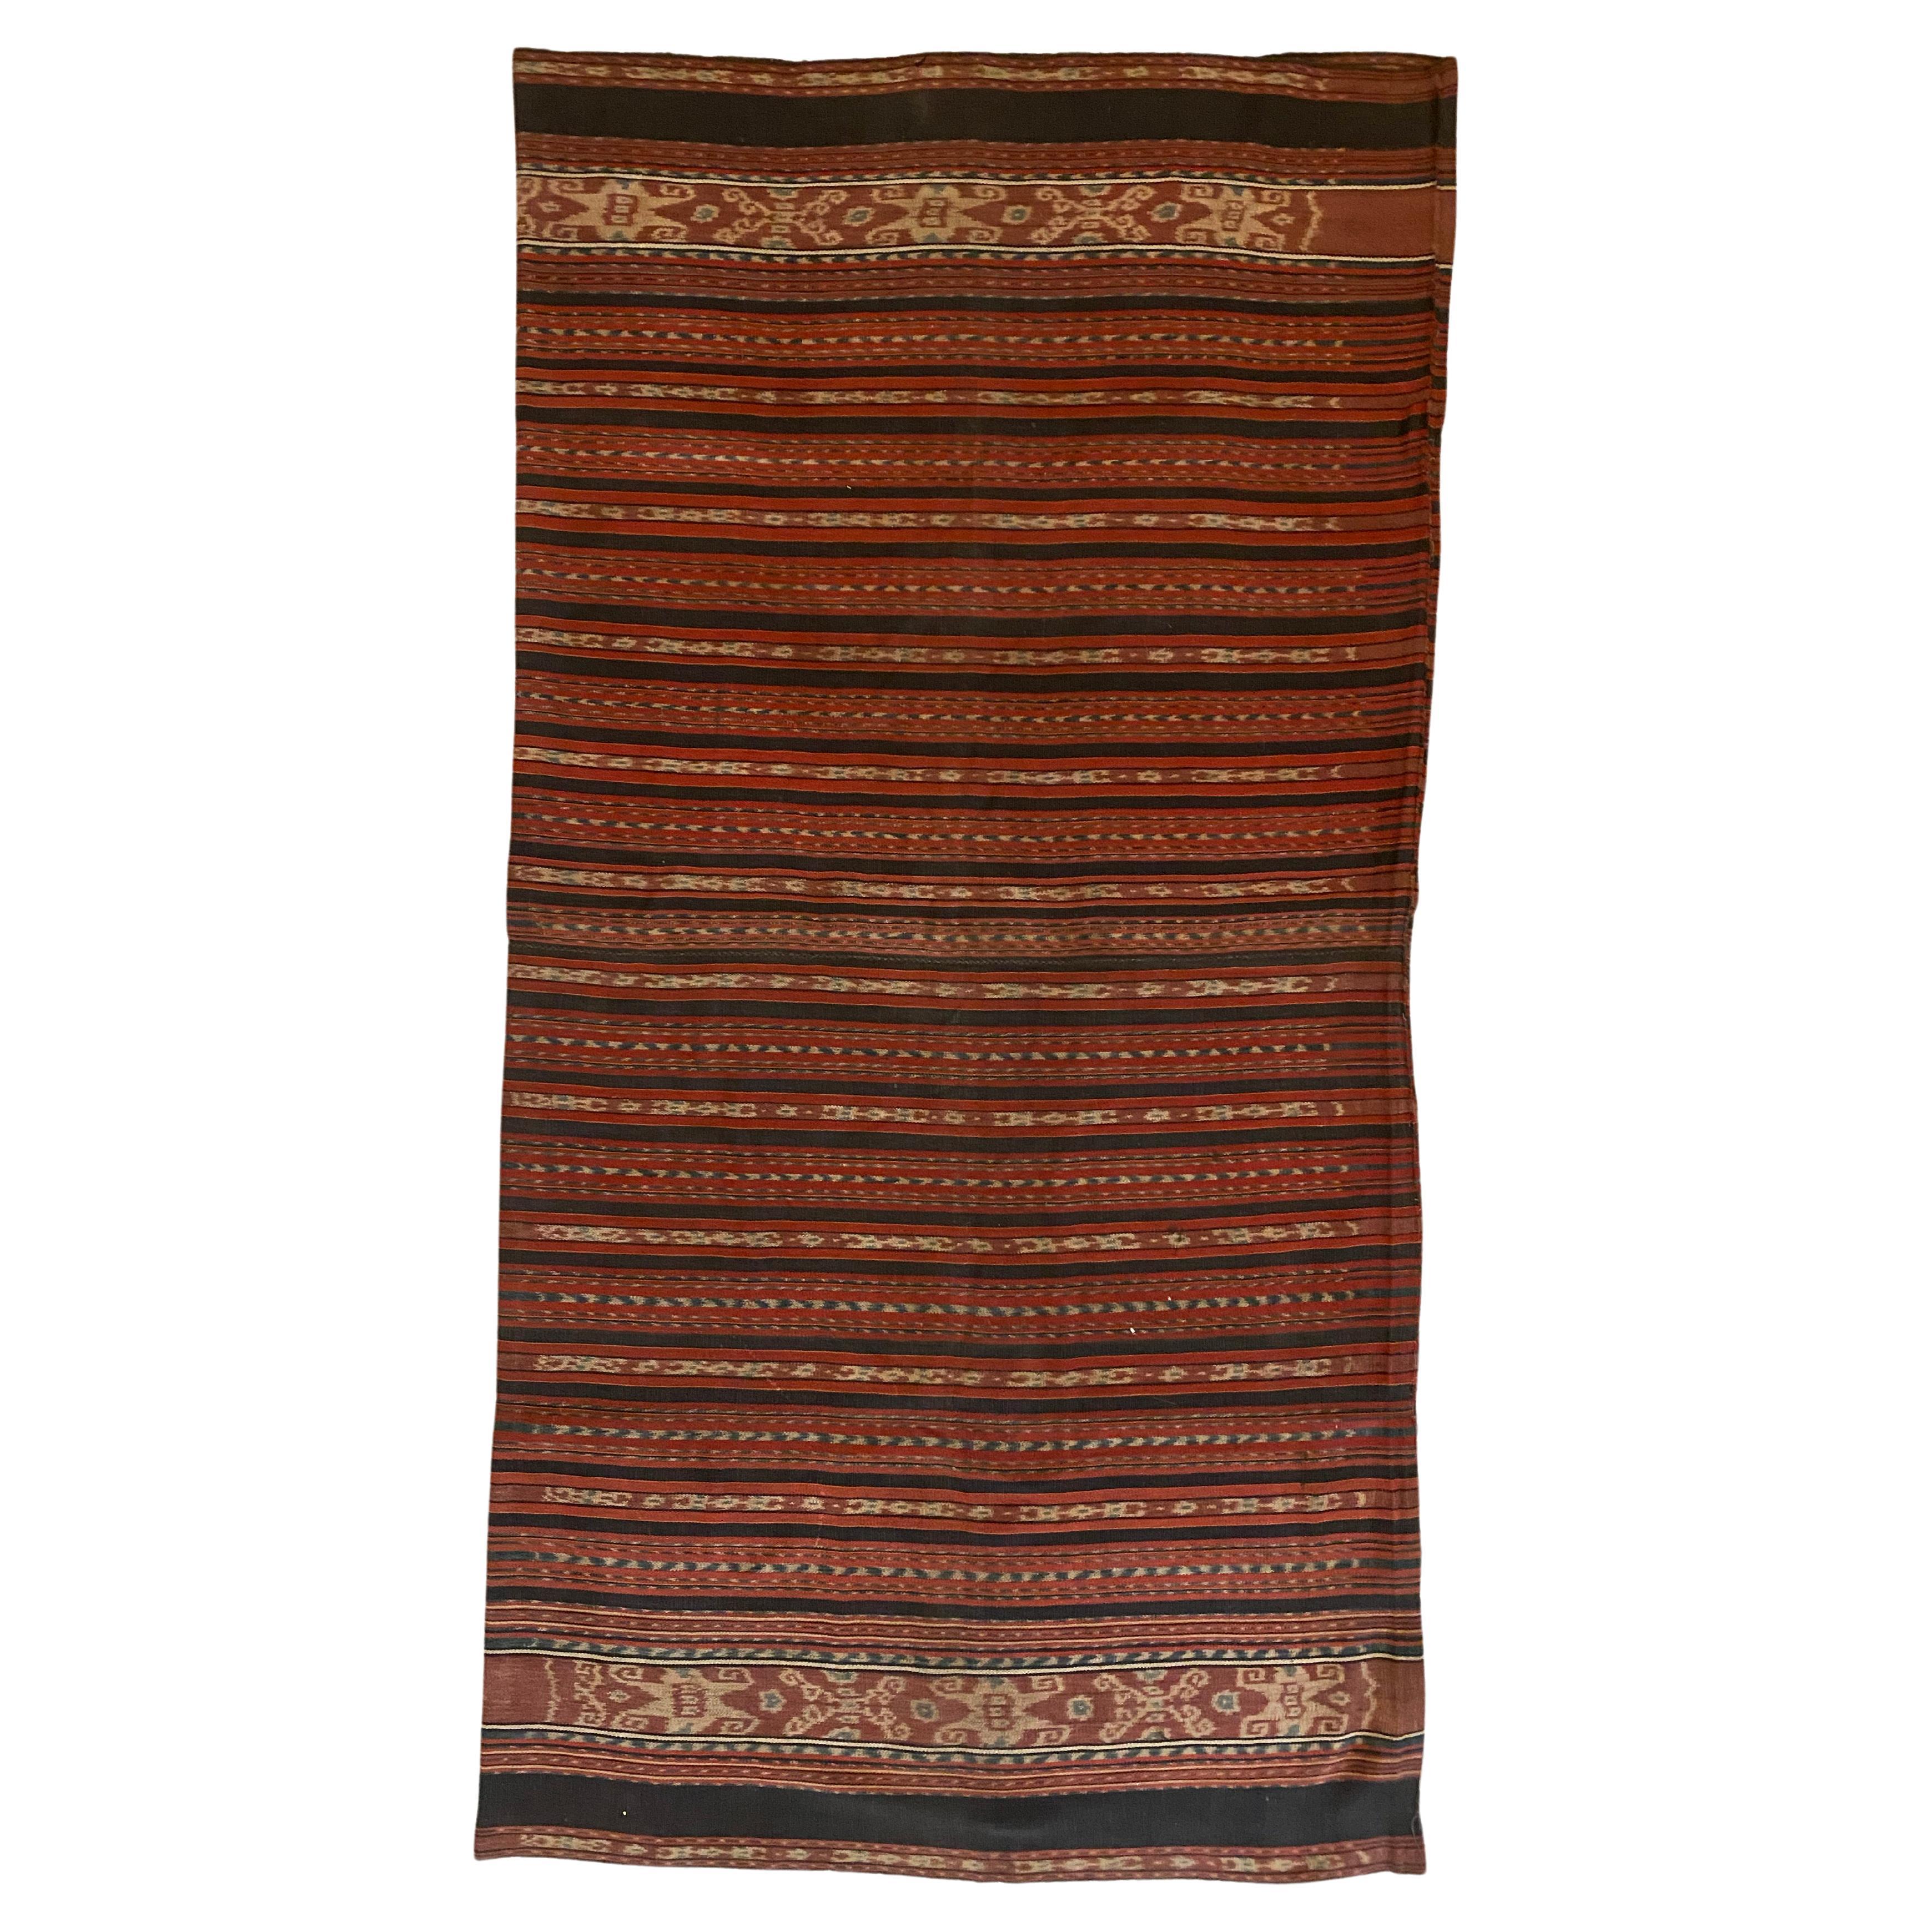 Ikat Textile from Flores Island, Indonesia